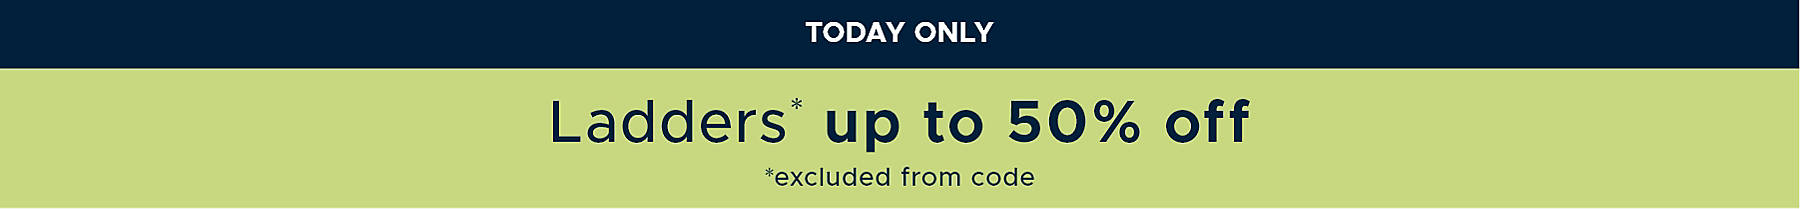 Today Only Ladders up to 50% off *excluded from code